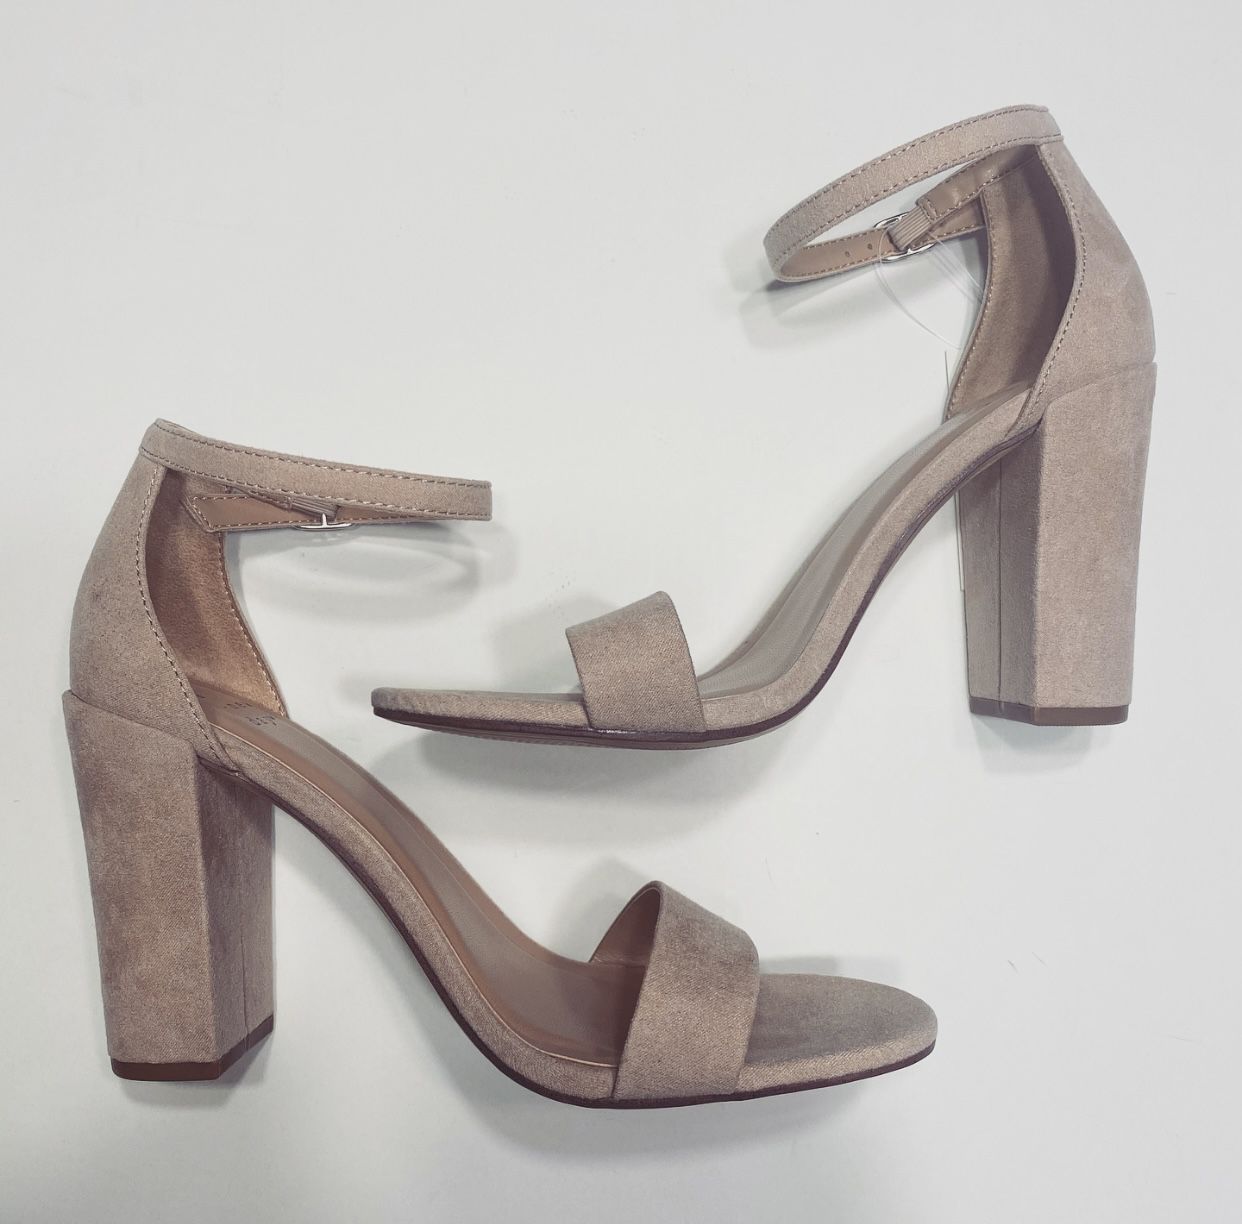 NWT A New Day Blush Suede Heeled Sandals Womens